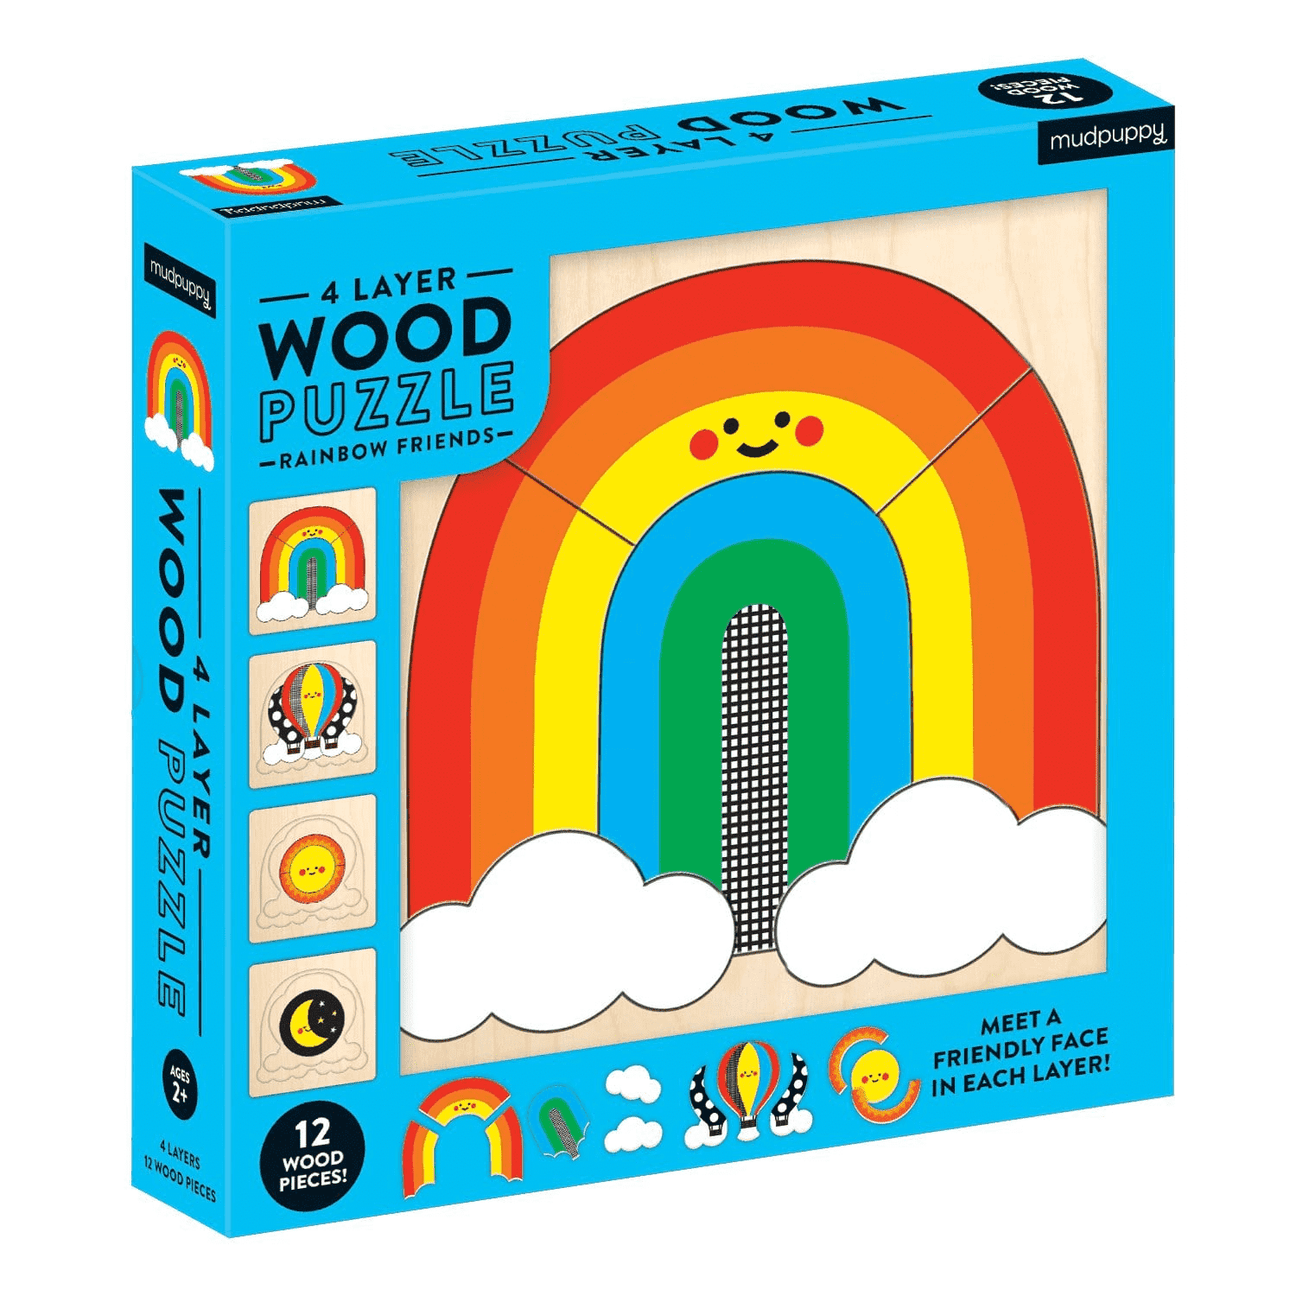 Rainbow Friends 4 Layer Wood Puzzle - Twinkle Twinkle Little One